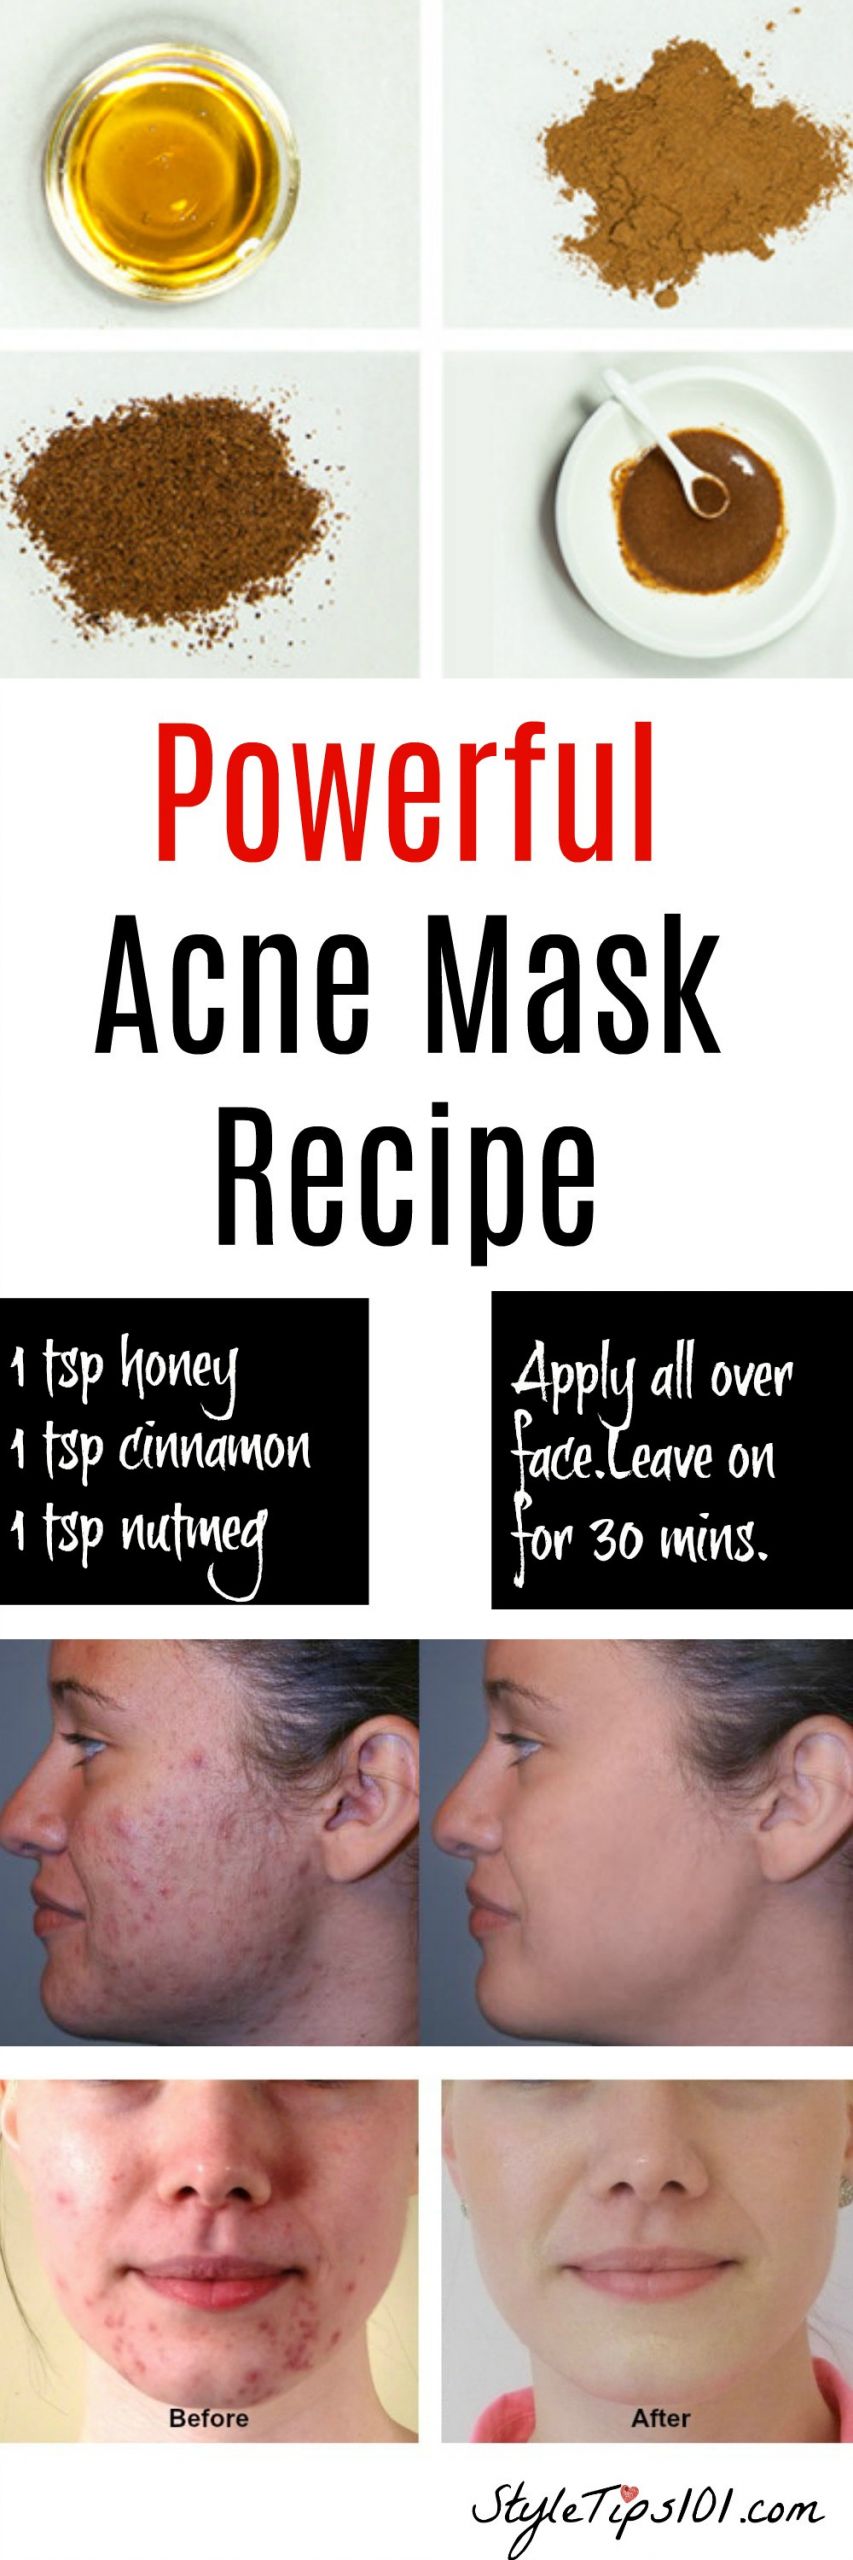 DIY Overnight Face Mask For Acne
 Homemade Natural Acne Mask